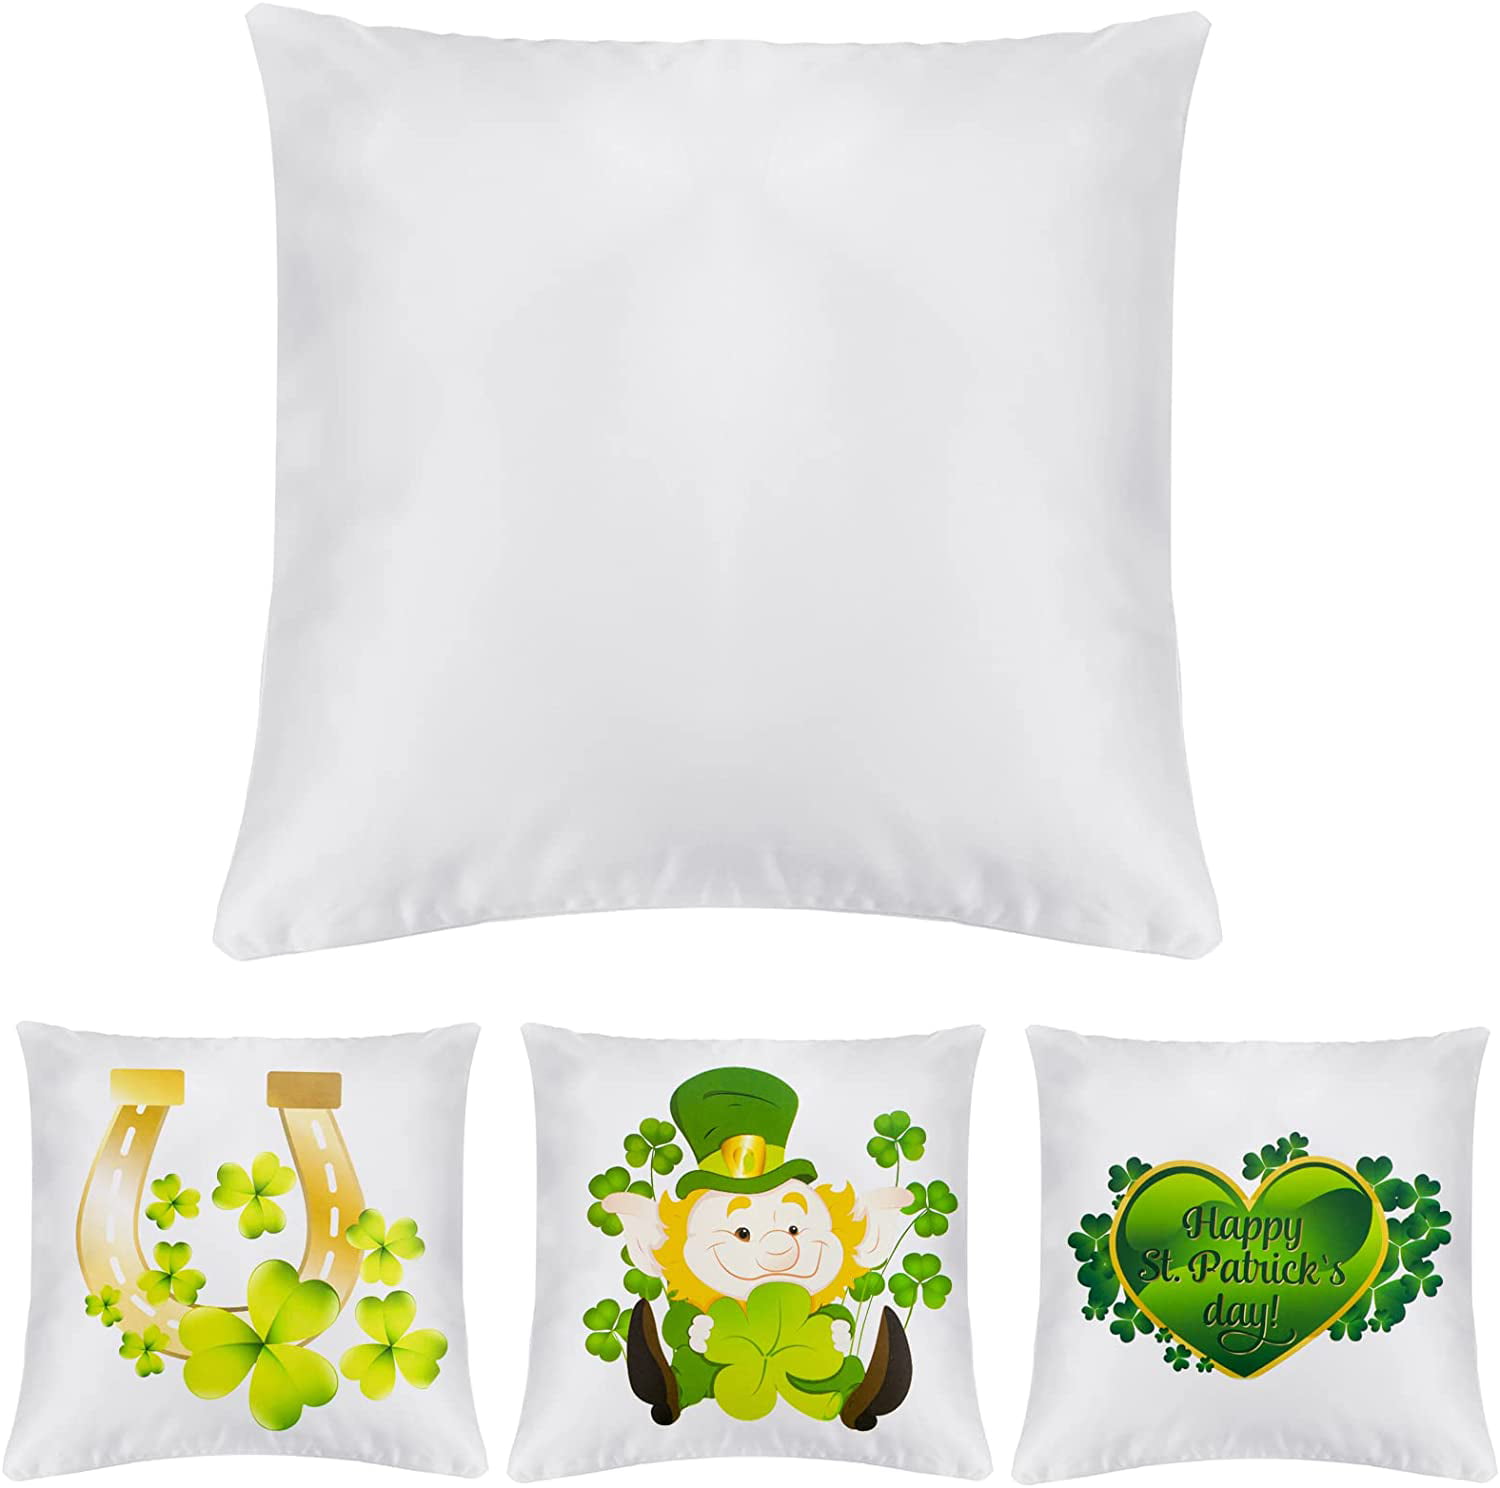 10 PACK 16" Sublimation Blank Pillow Case Reversible Sequin Magic Cushion Cover 